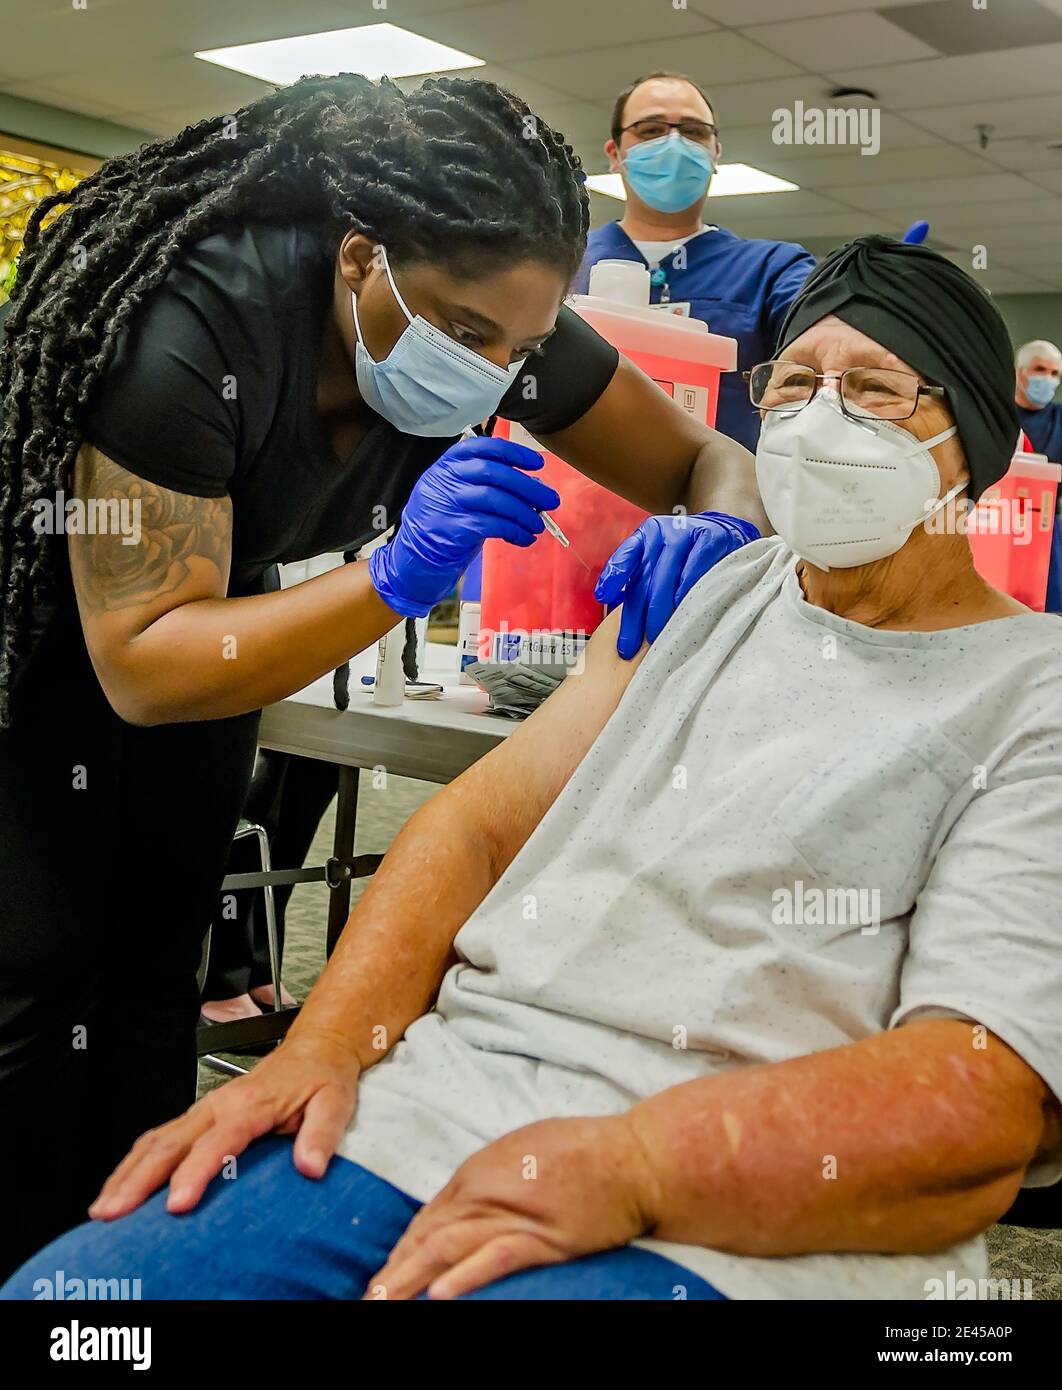 A healthcare worker administers the first dose of the COVID-19 vaccine from Pfizer-BioNTech to a 74-year-old woman in Mobile, Alabama. Stock Photo